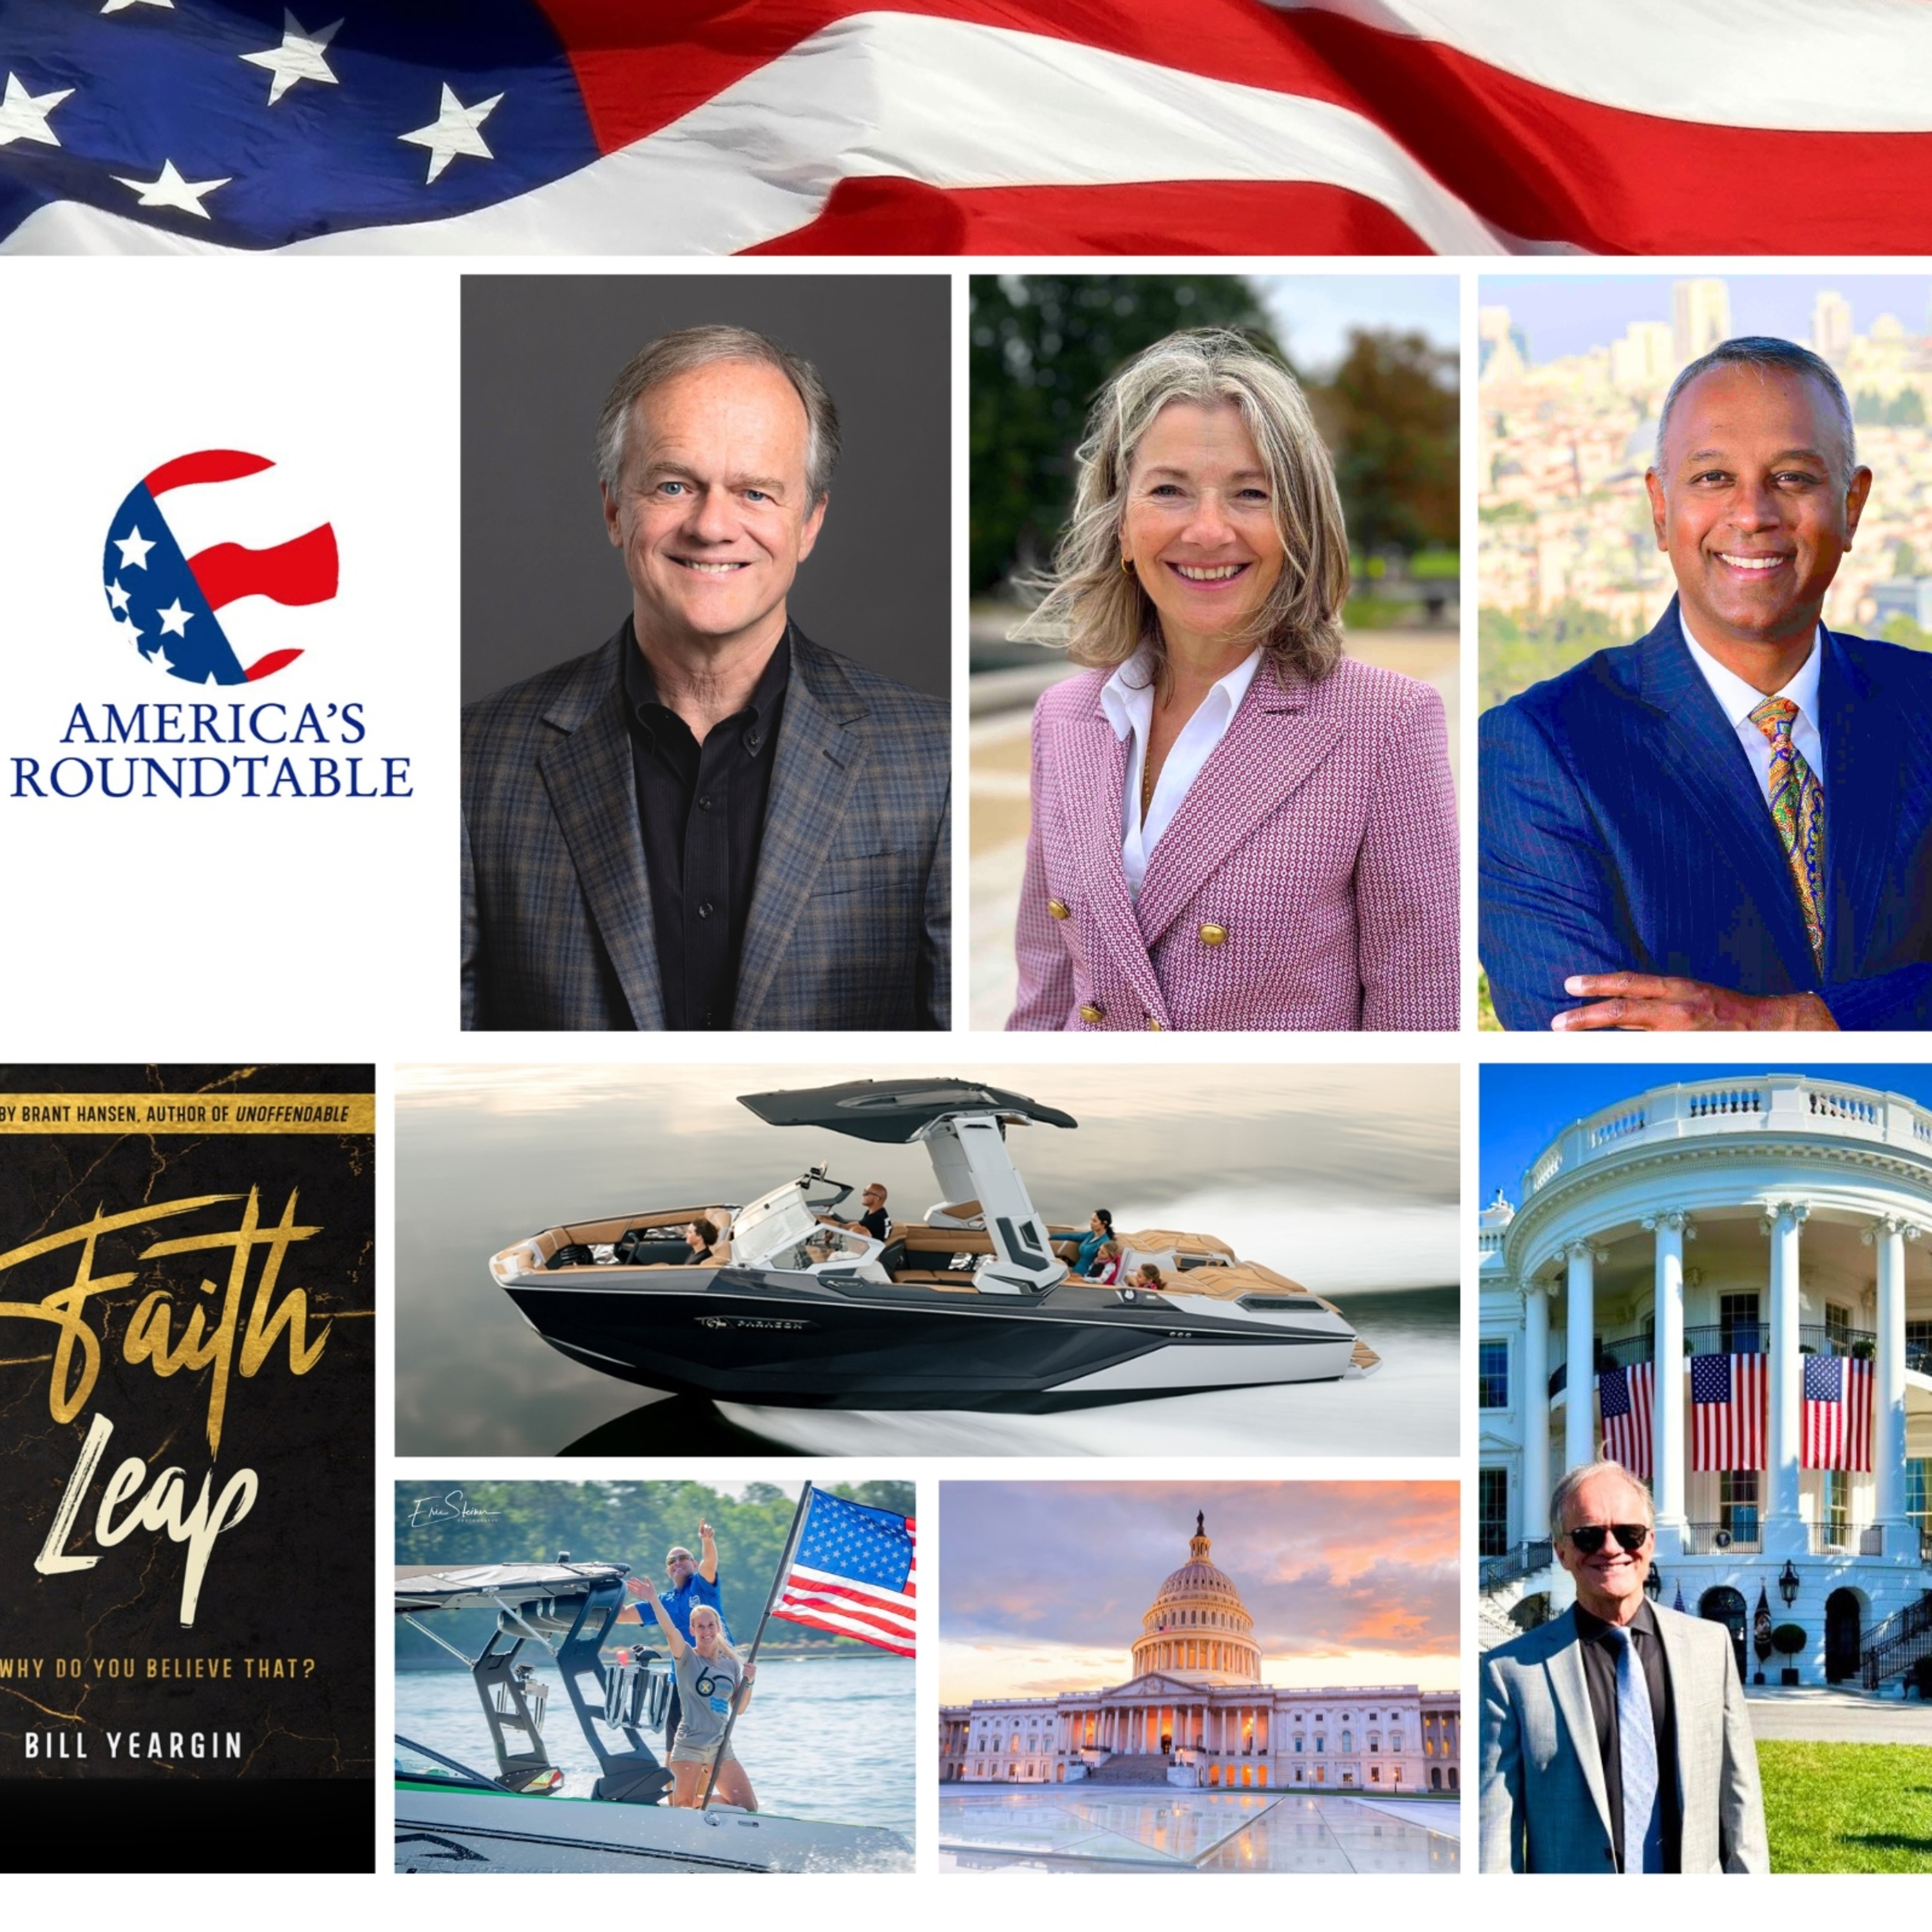 America's Roundtable with Bill Yeargin, CEO, Correct Craft and Author of "Faith Leap" | Discover How Faith and Values Transformed an Iconic Boating Company from $40M in 2009 to $1B | The Economics of Culture